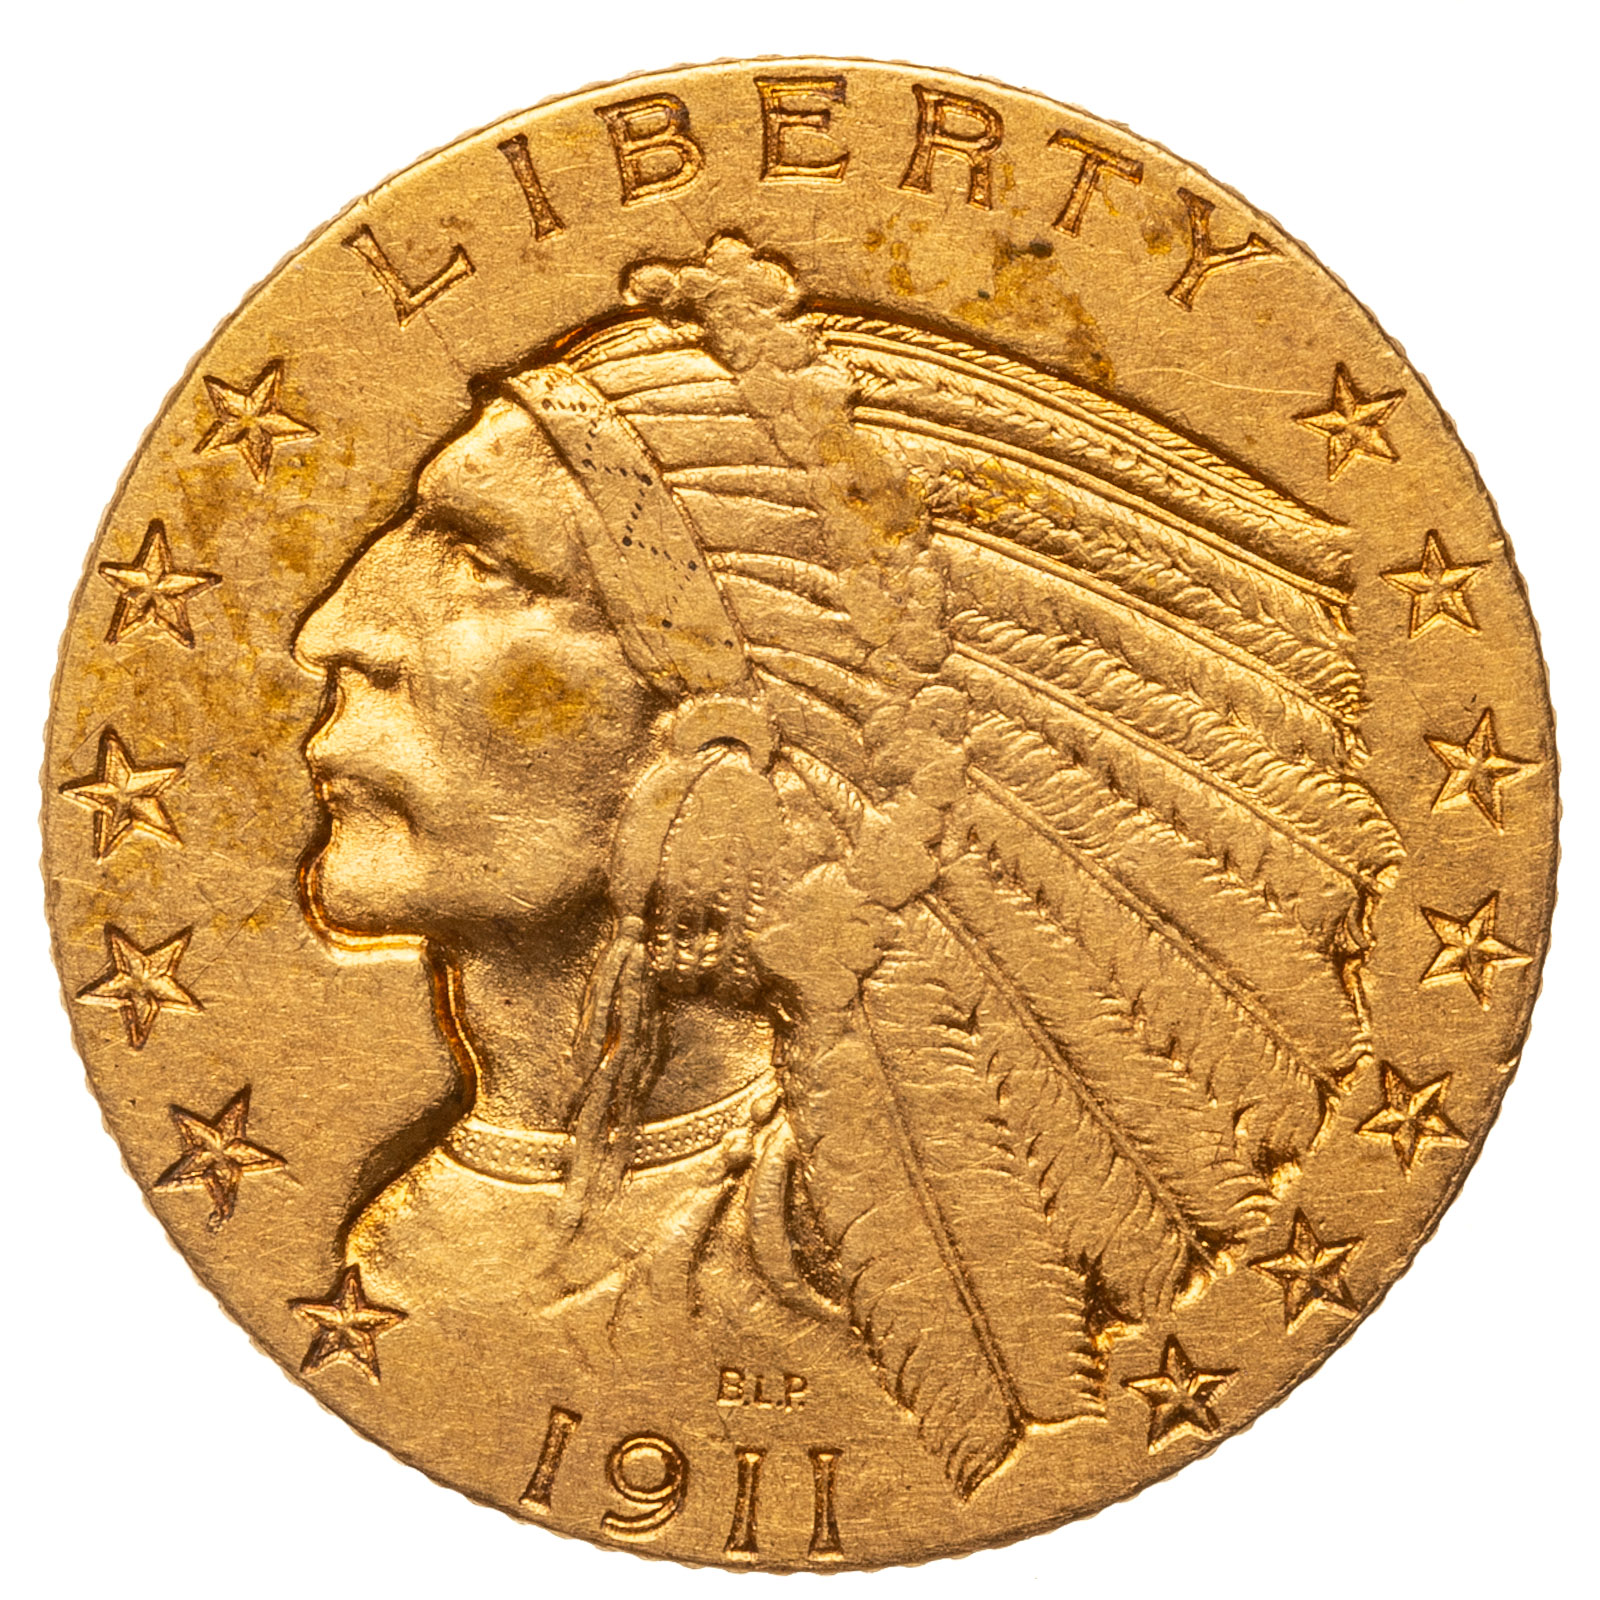 1911 $5 INDIAN HALF EAGLE XF These